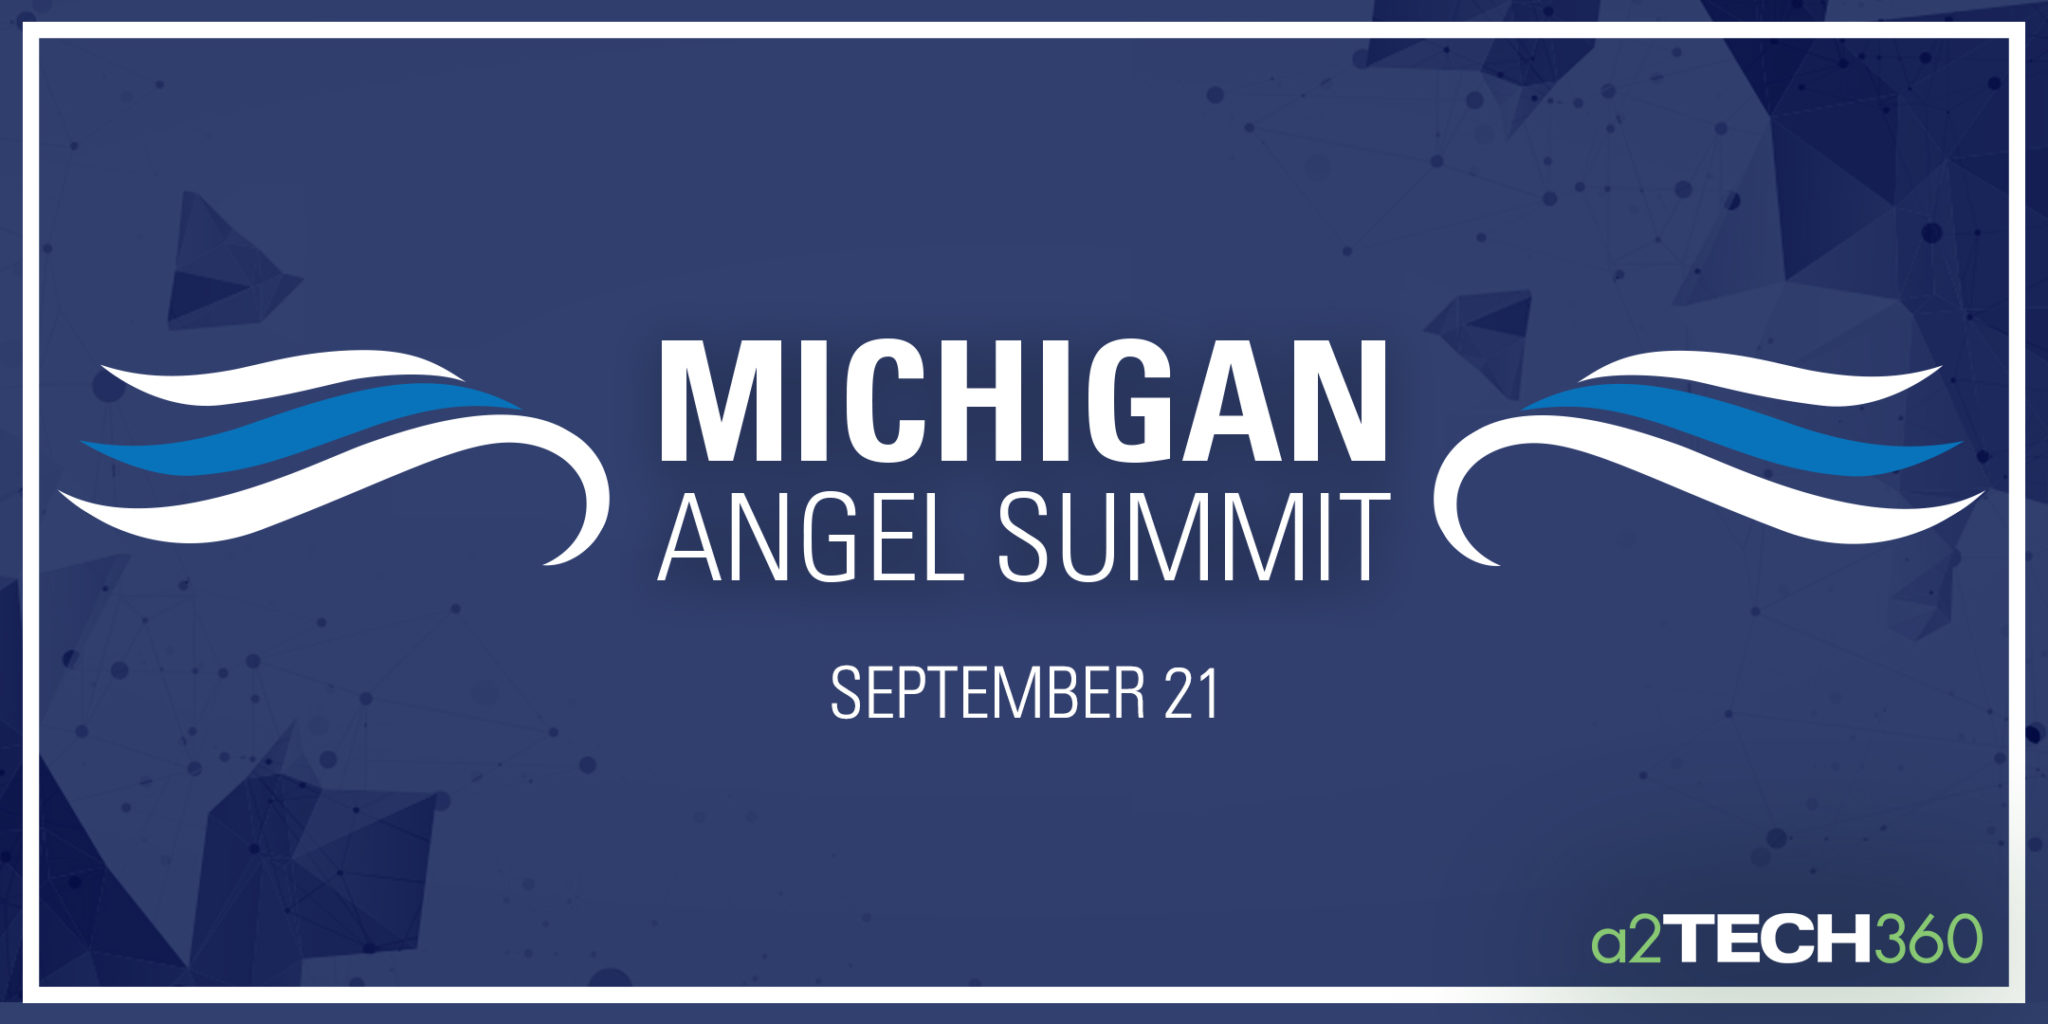 Michigan Angel Summit to Deliver Incredible Speaker Line Up, Valuable